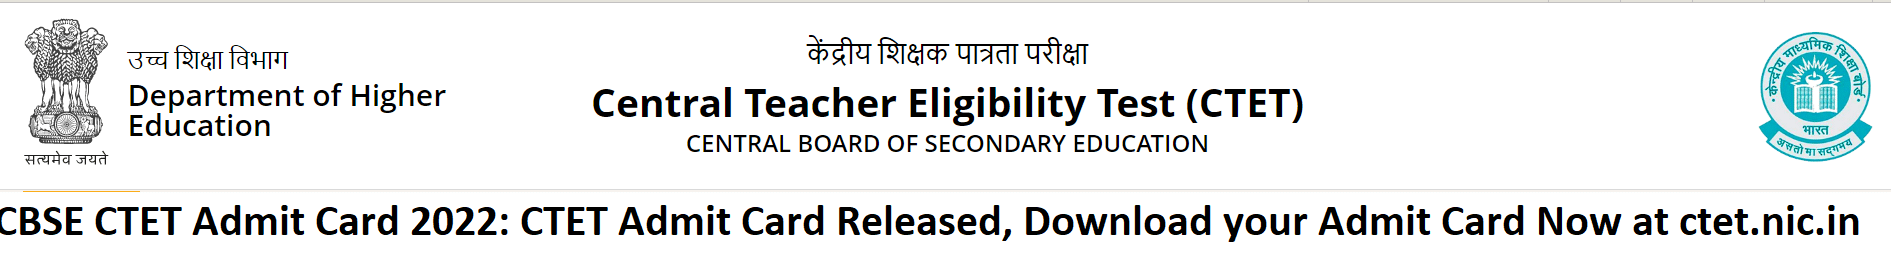 CBSE CTET Admit Card 2022: CTET Admit Card Released, Download your Admit Card Now at ctet.nic.in